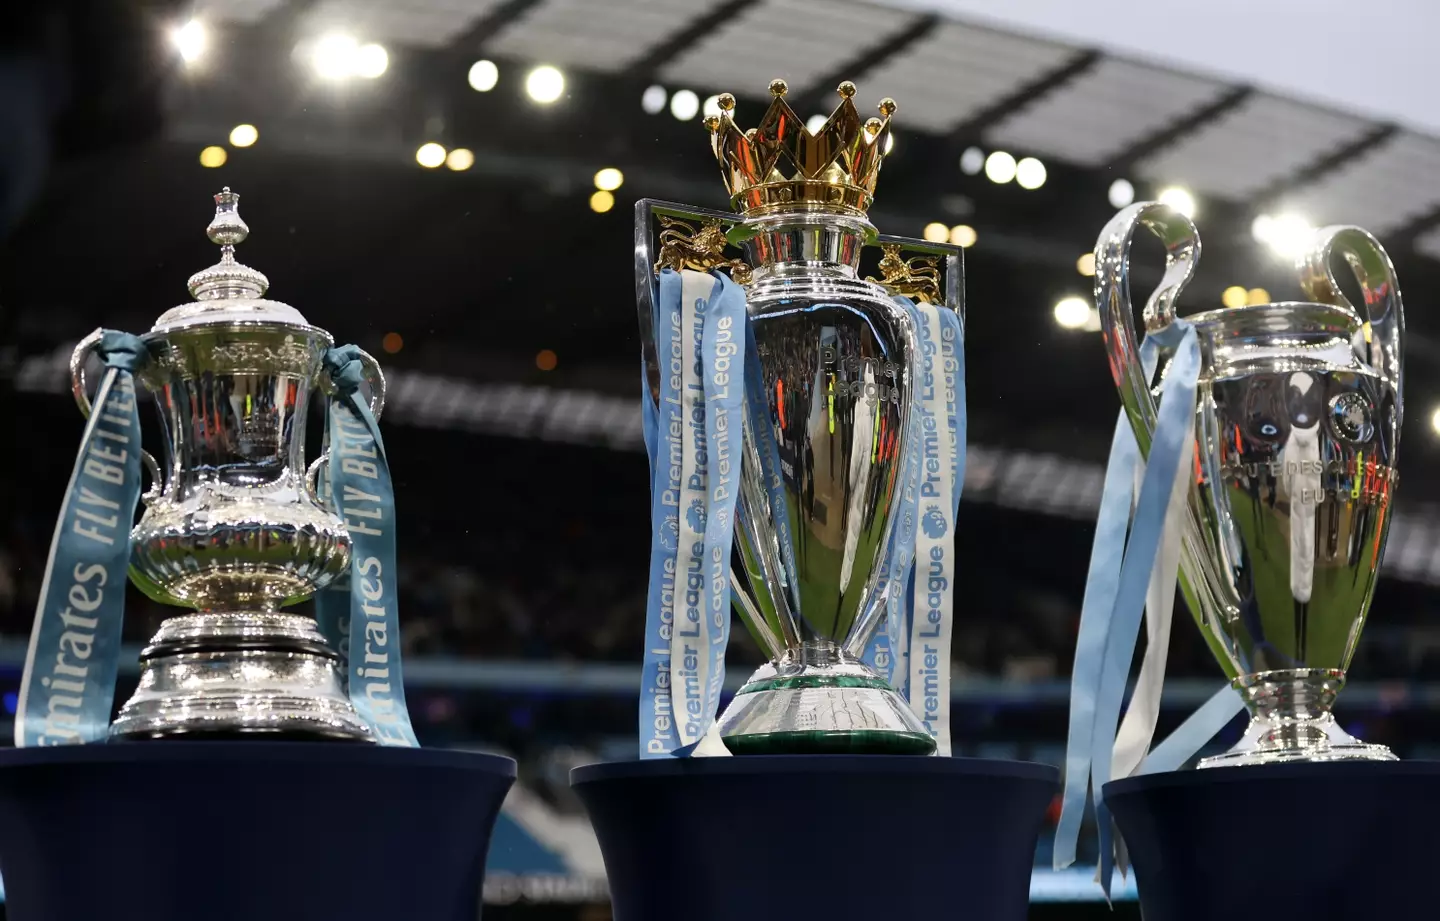 City displayed the Premier League, FA Cup and Champions League trophies they captured last season. (Image